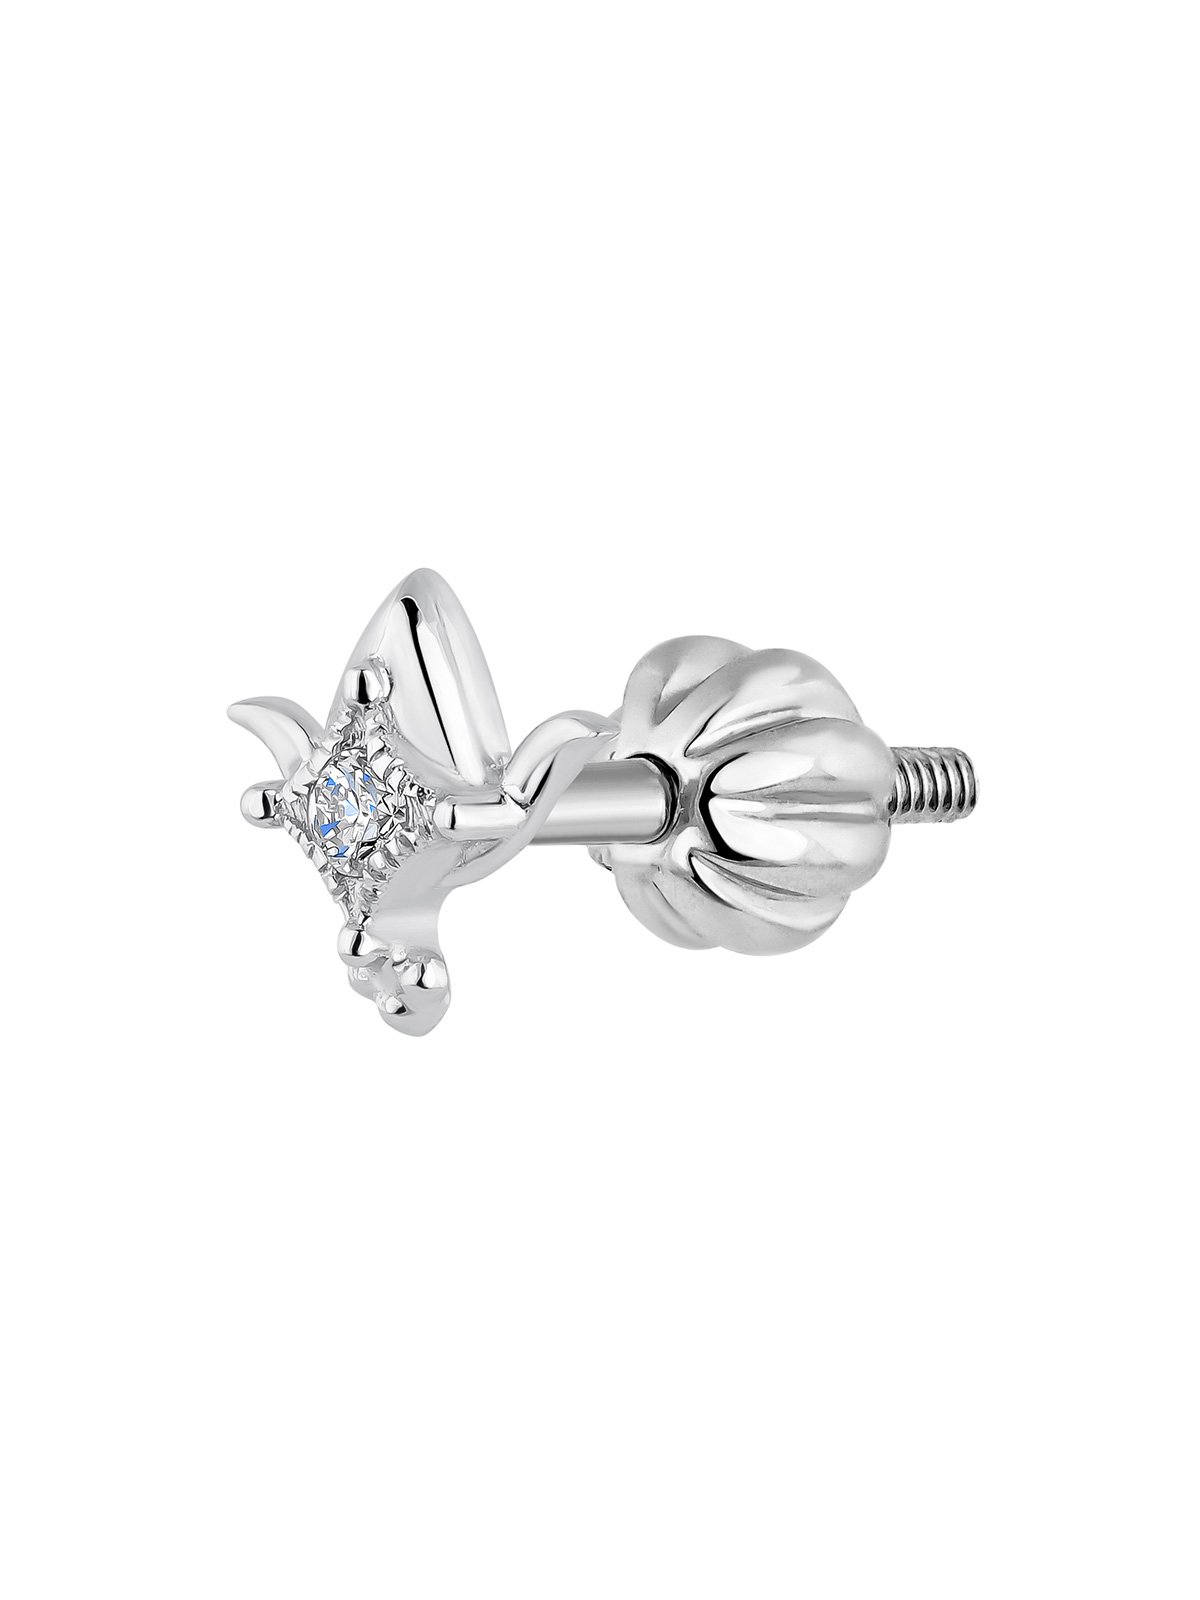 Individual 9K white gold earring with lotus flower shaped diamonds